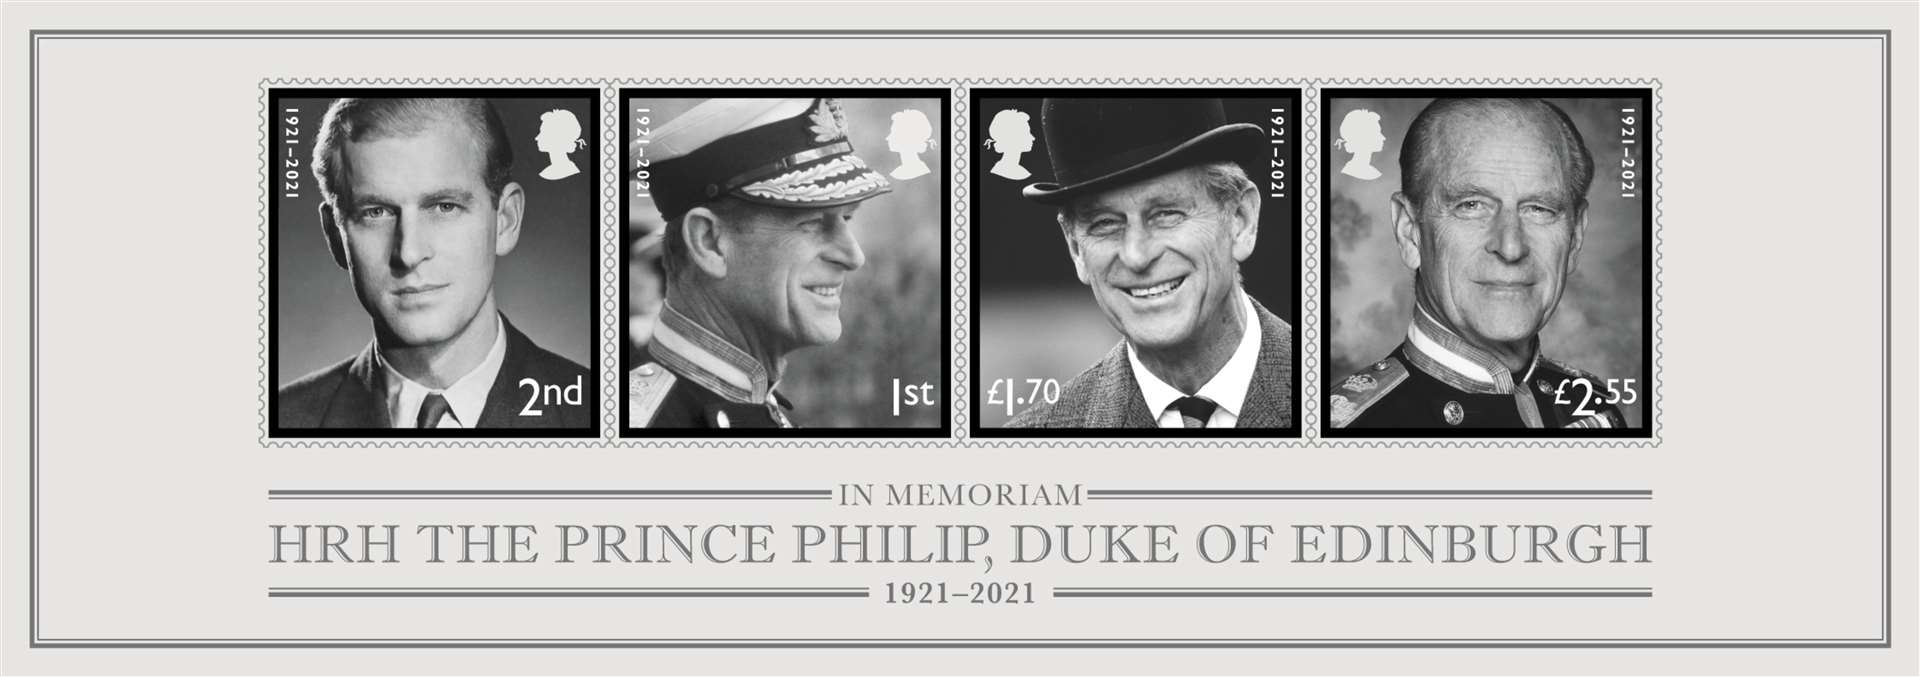 Royal Mail has released a new collection of stamps to mark the life of The Duke of Edinburgh, also available to buy from June 24